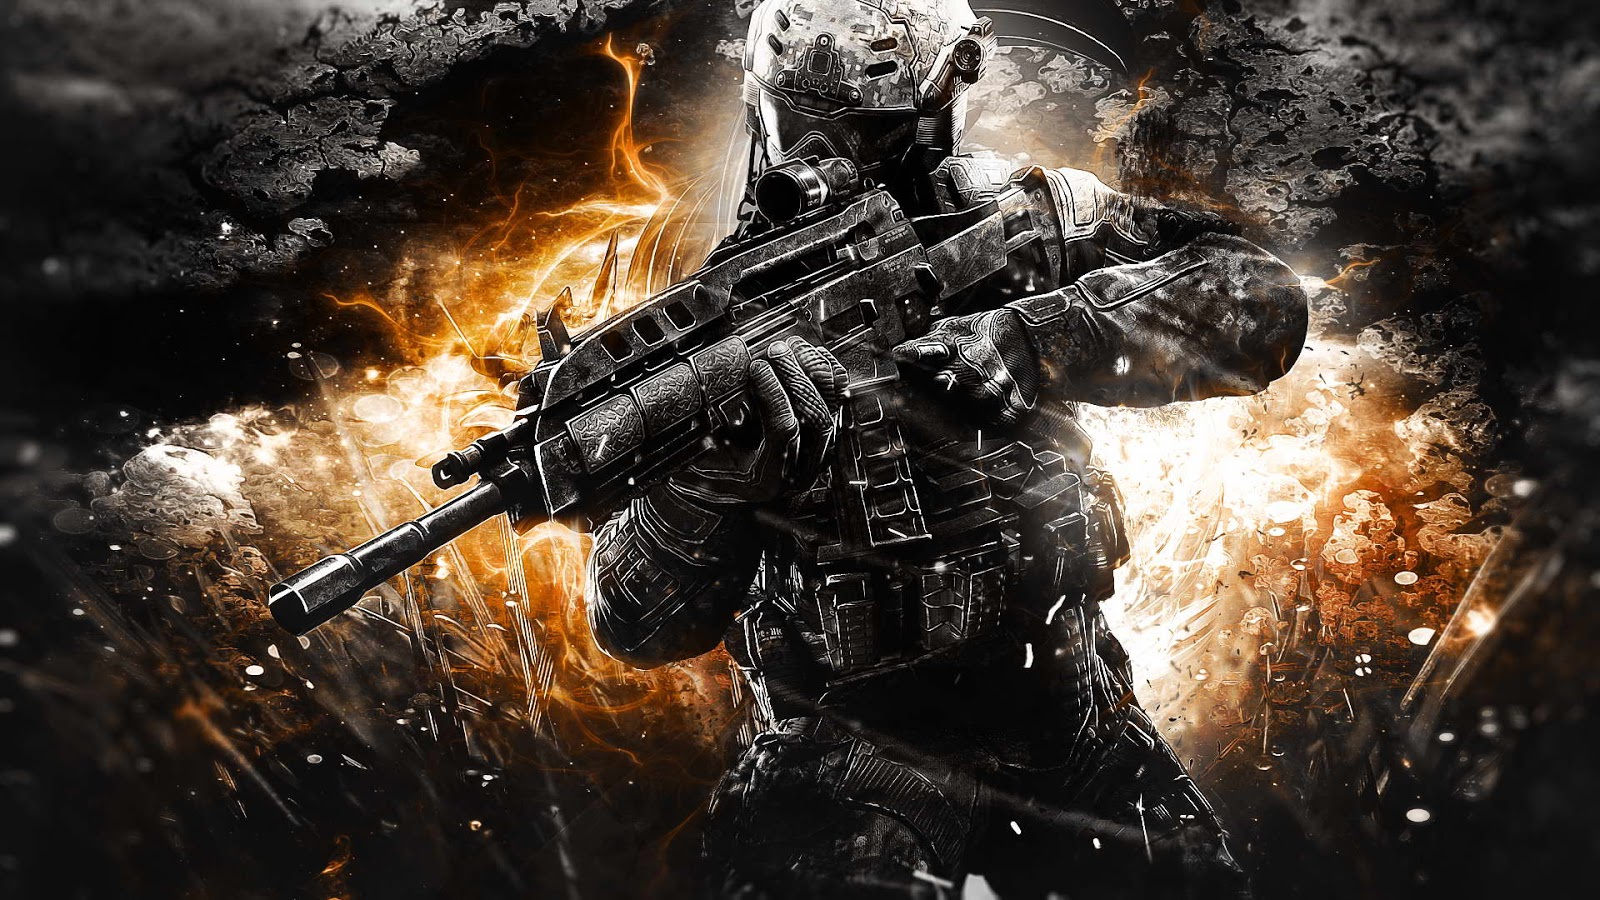 call of duty 2 zombies wallpapercod black ops 2 zombies wallpapers hd